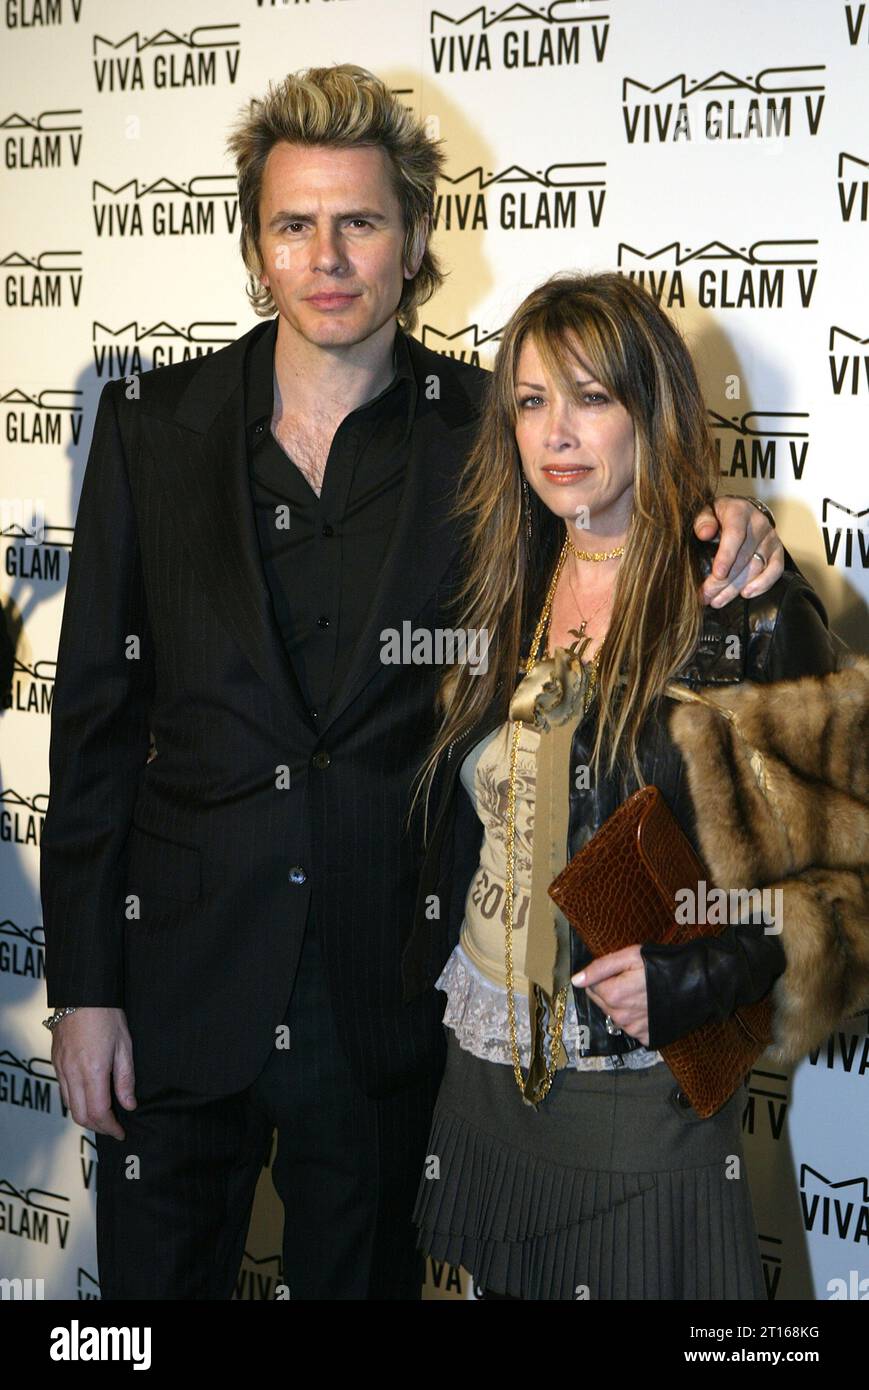 John Taylor & wife Gela Nash-Taylor arriving at the MAC Viva Glam V Launch Dinner at the Hempel Hotel in London in 2004 Stock Photo